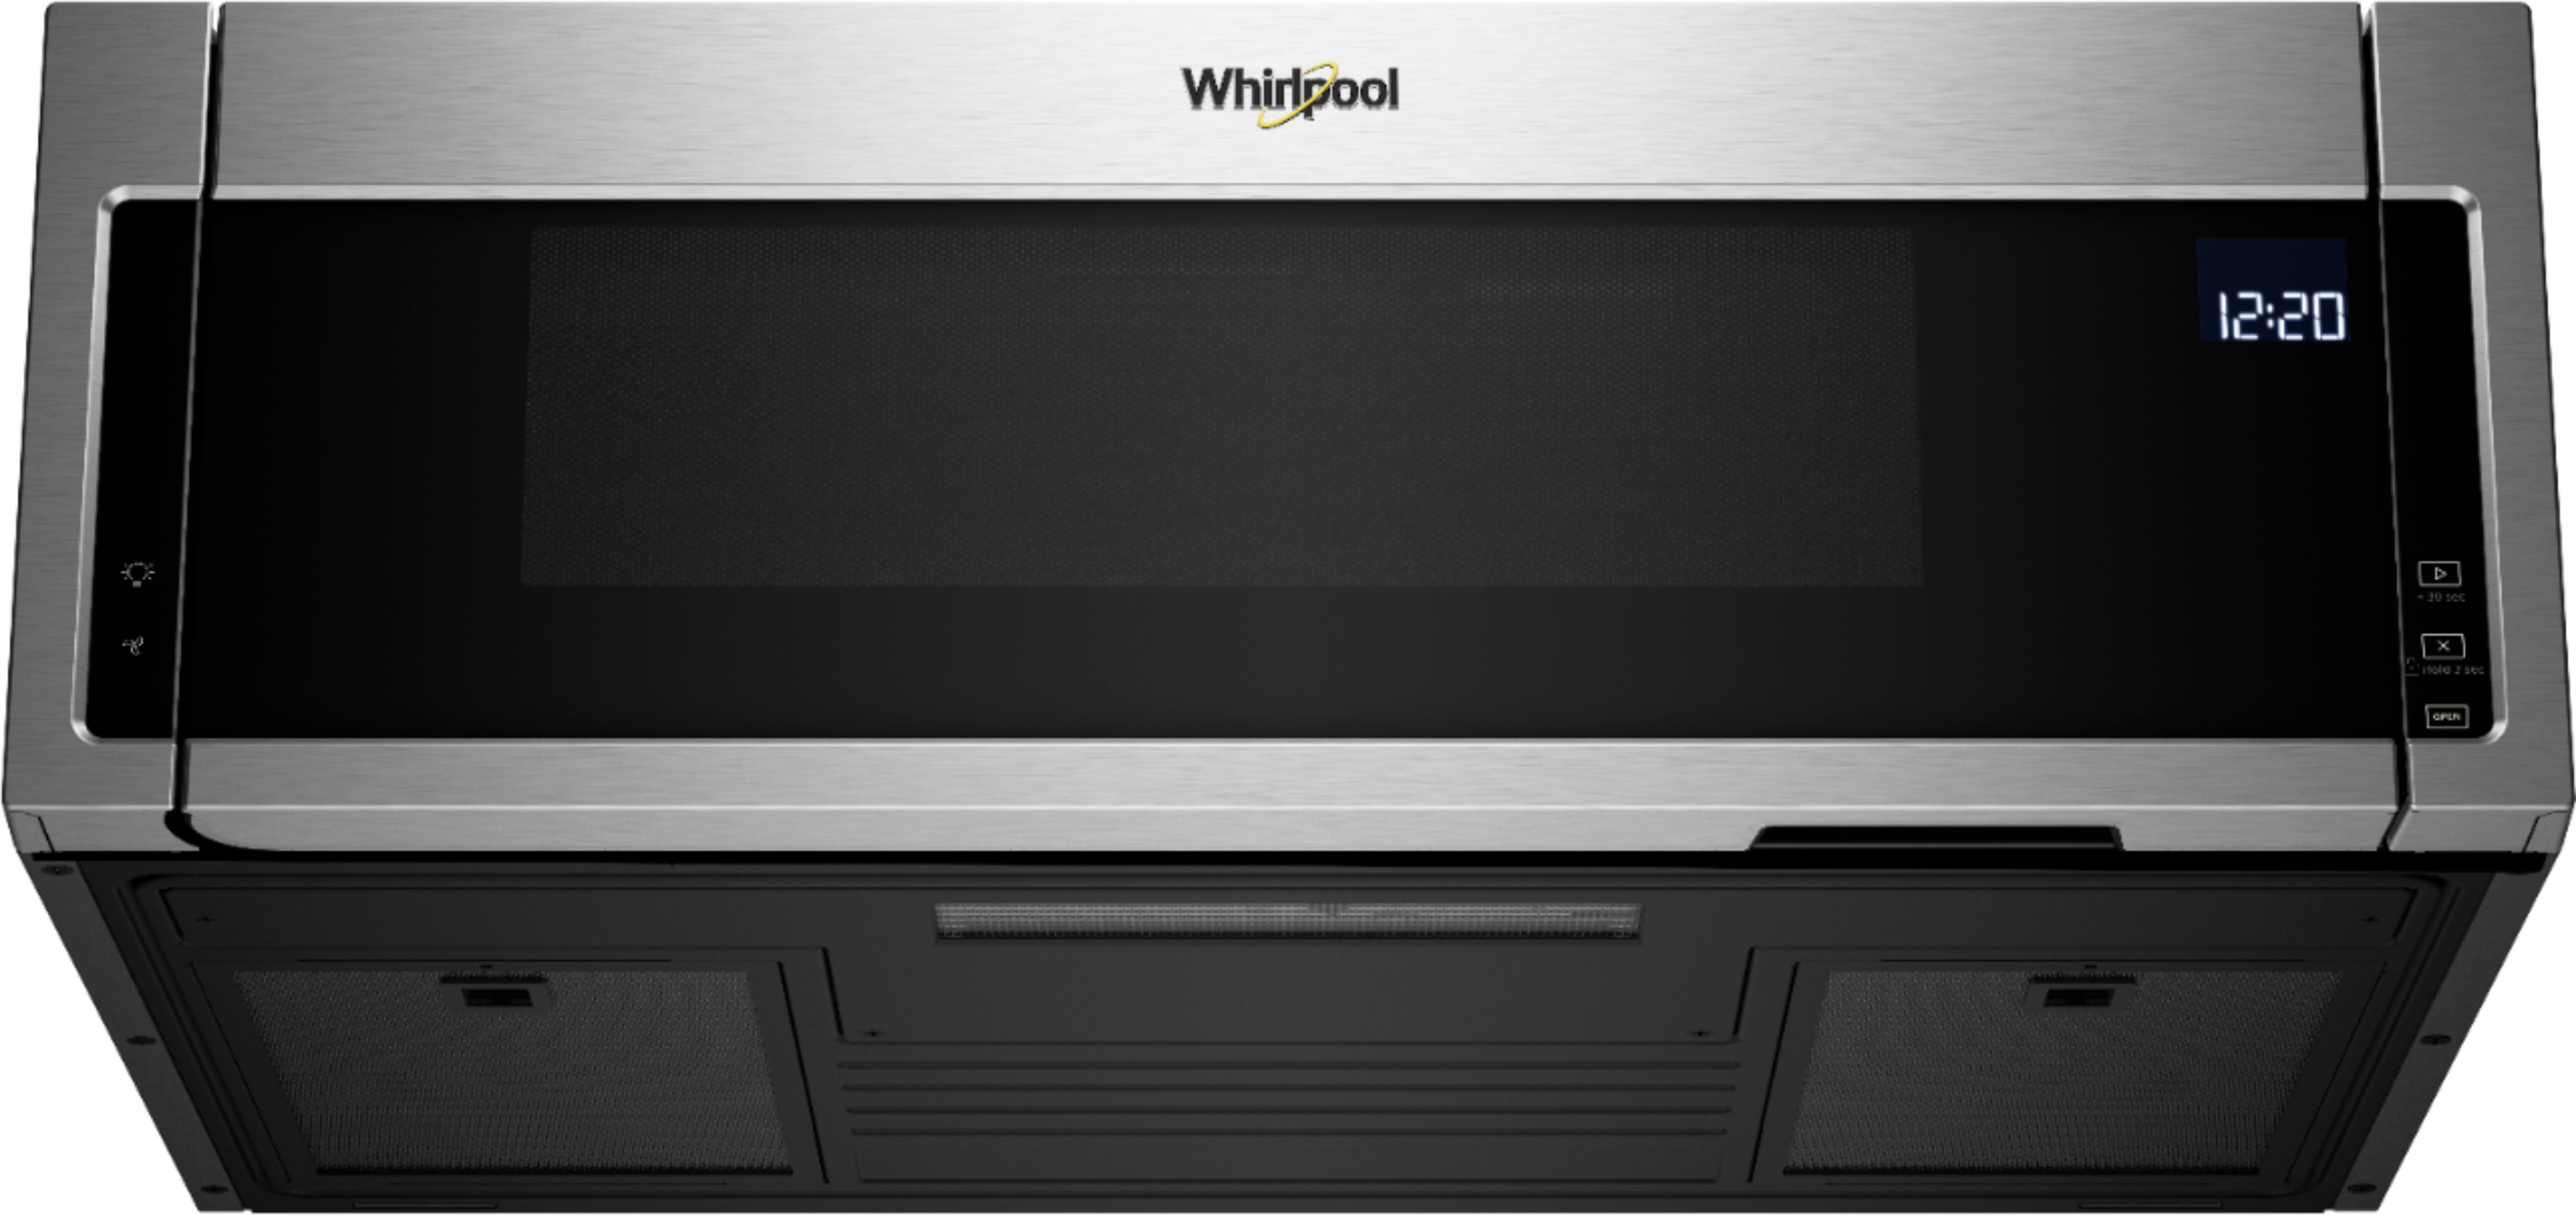 Customer Reviews: Whirlpool 1.1 Cu. Ft. Low Profile Over-the-Range Low Profile Stainless Steel Microwave